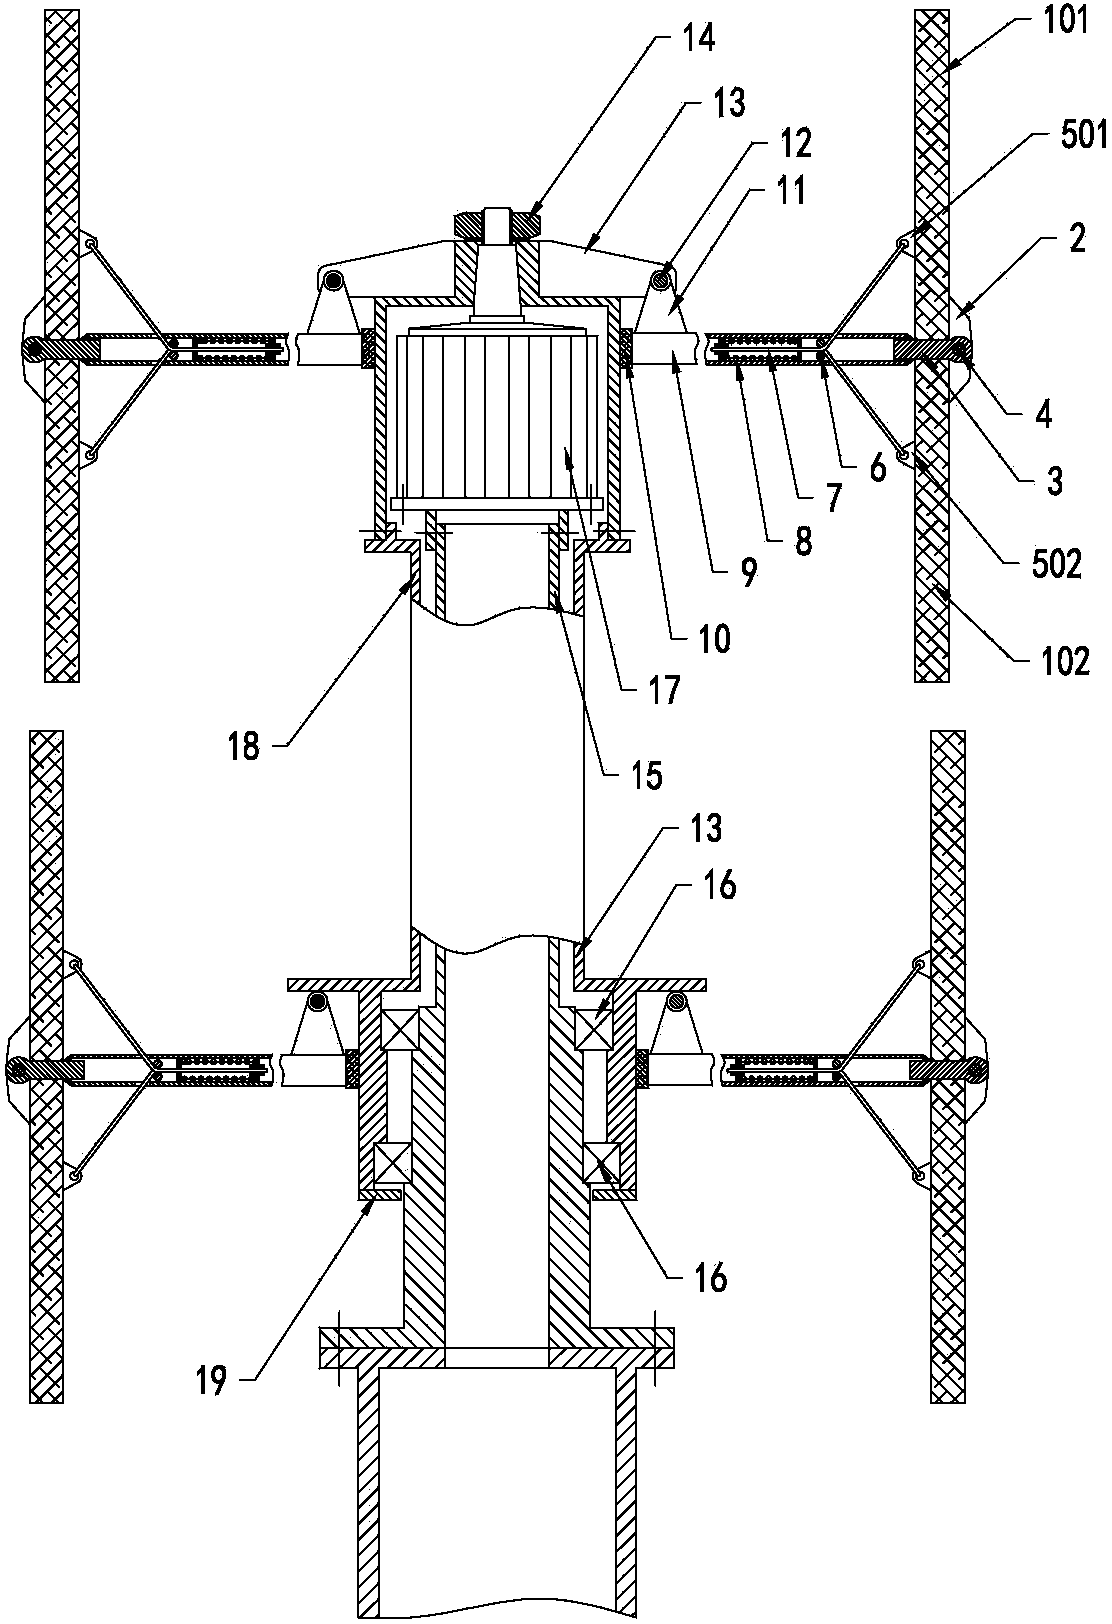 Vertical-axis wind turbine generator system with multi-layer wings and double swing vanes